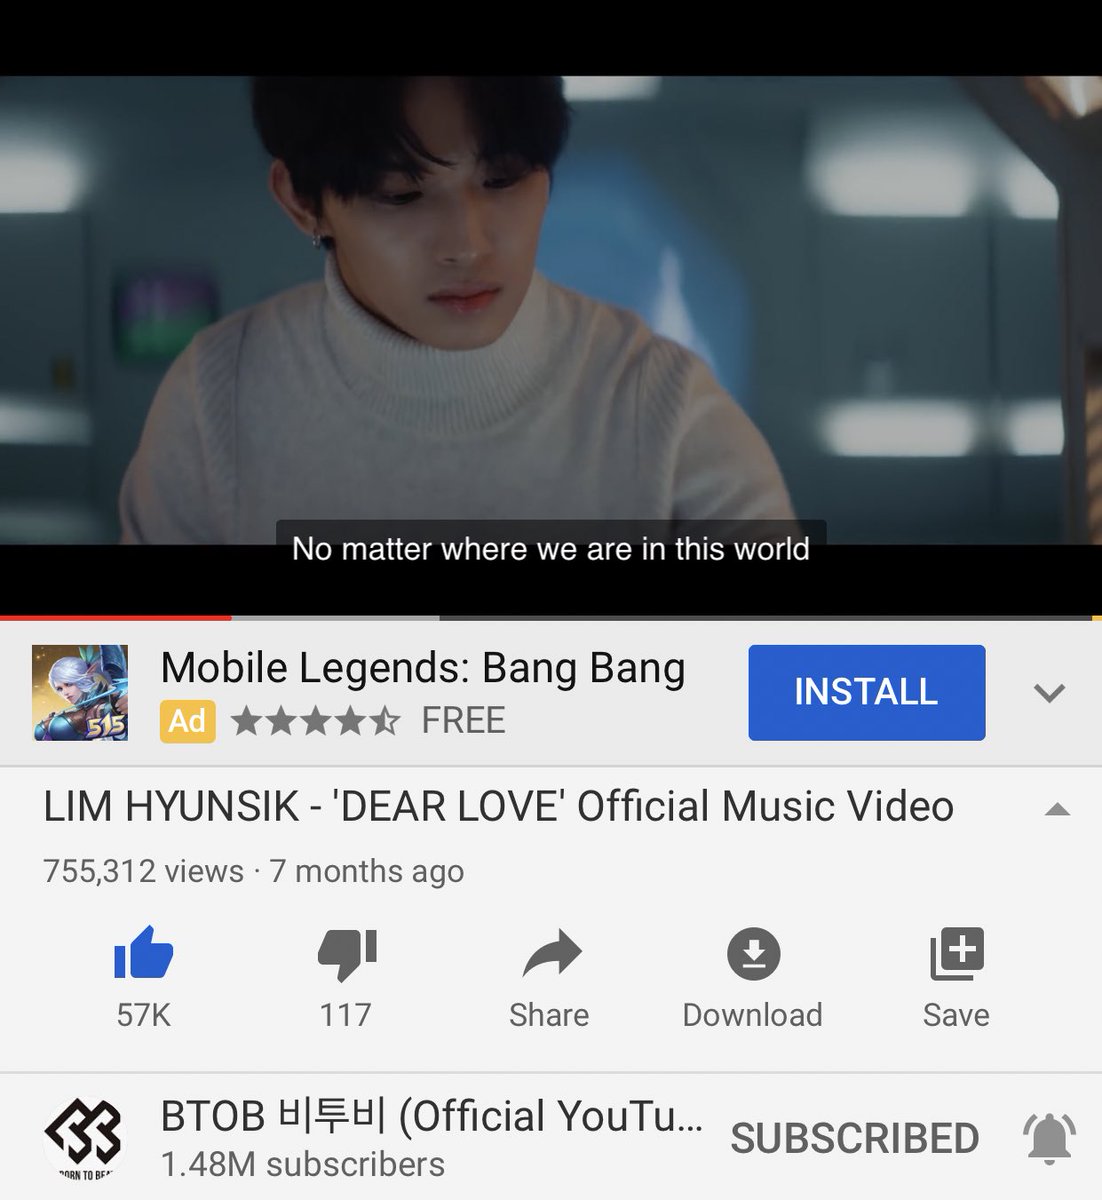 Dear Love view count streaming thread 16MAY2020 5:51AM KST755,312I didnt get to stream yesterday bec I was so busy :—-( but im glad the view count went up a lot!